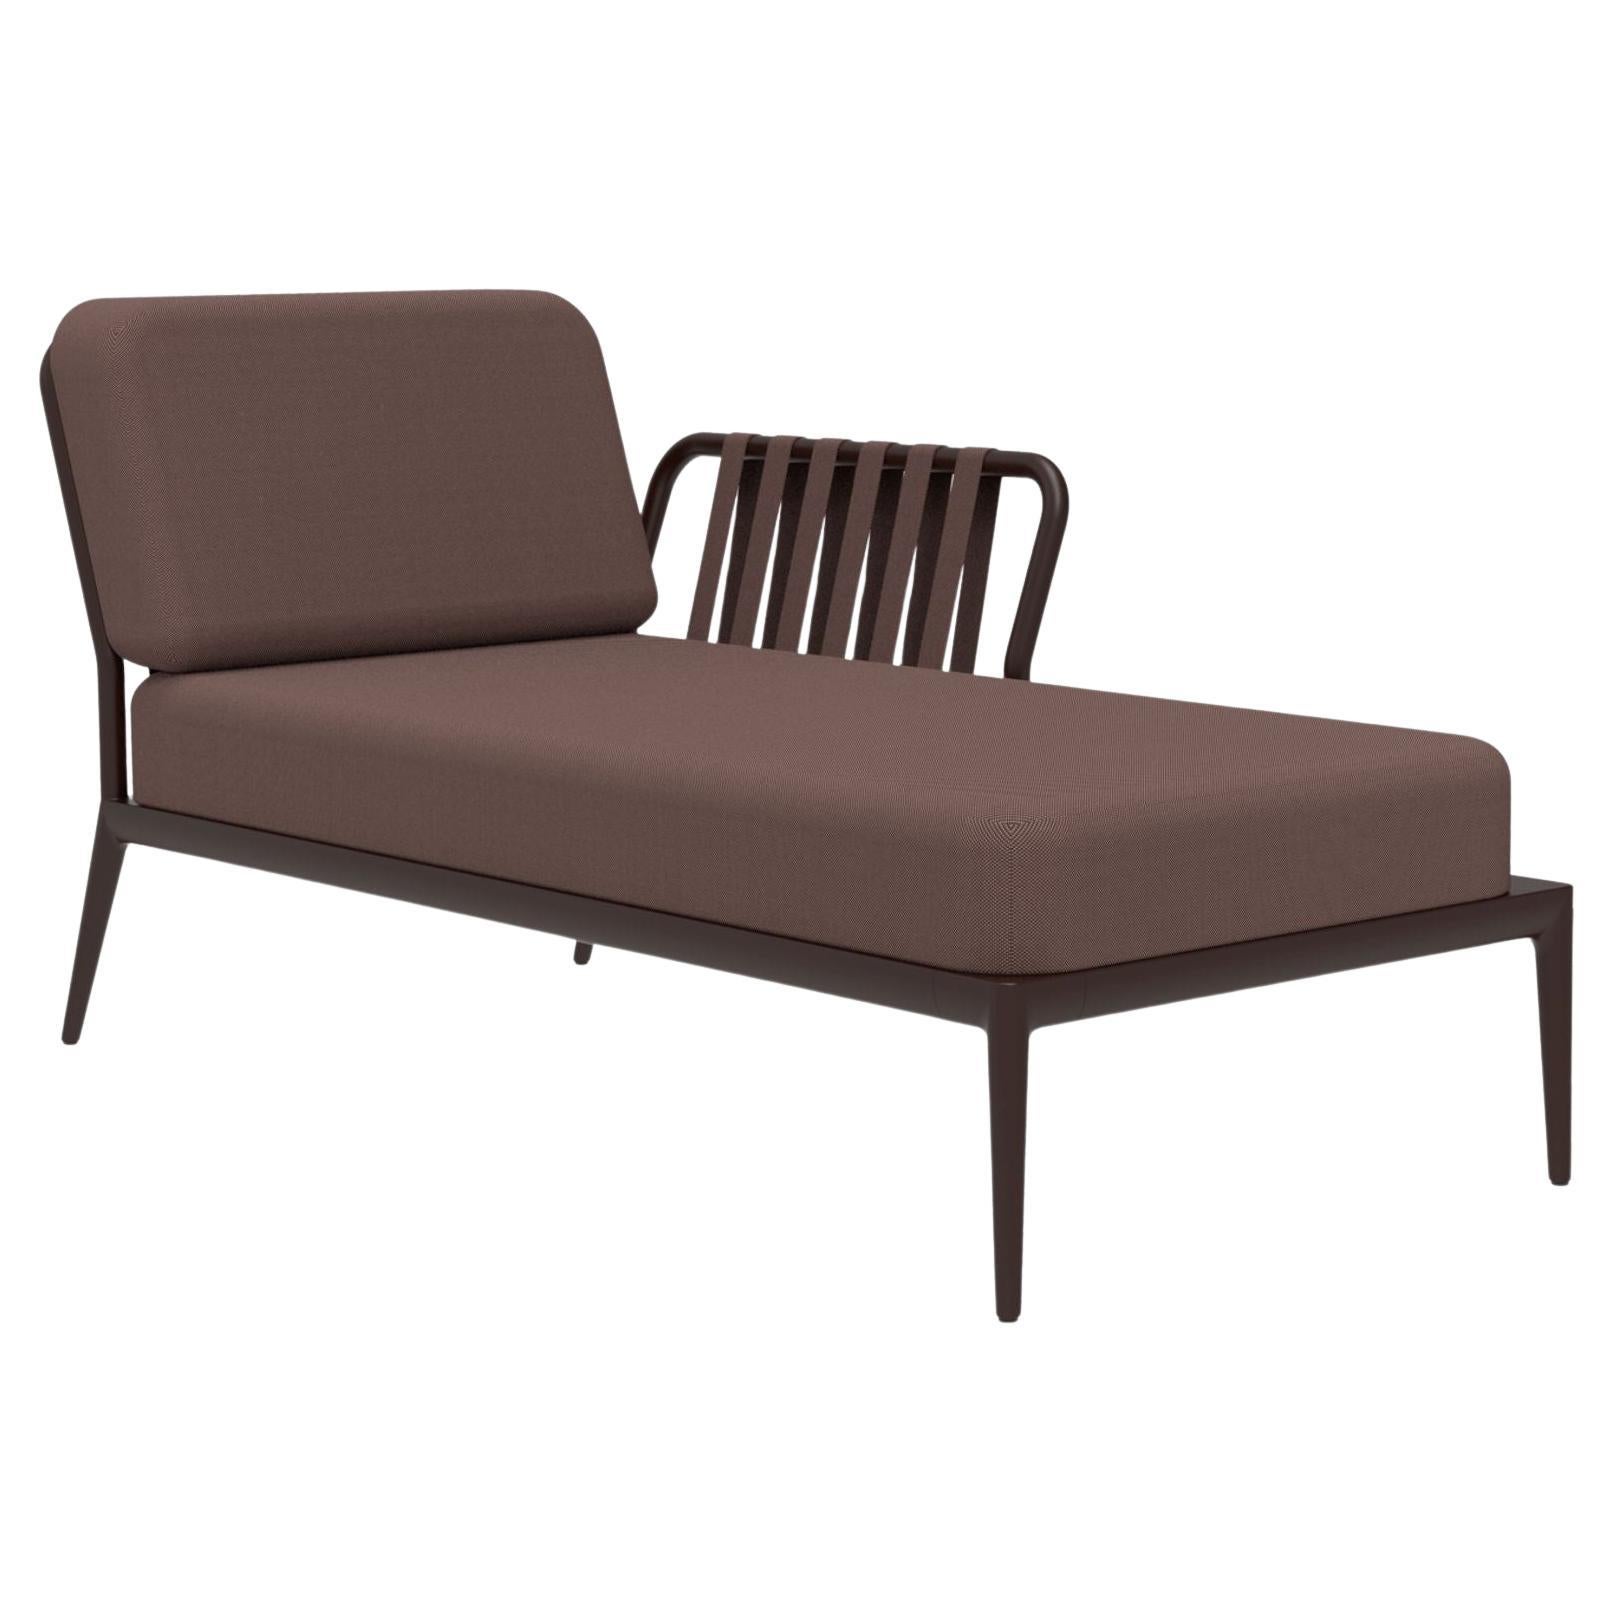 Ribbons Chocolate Left Chaise Longue by MOWEE For Sale